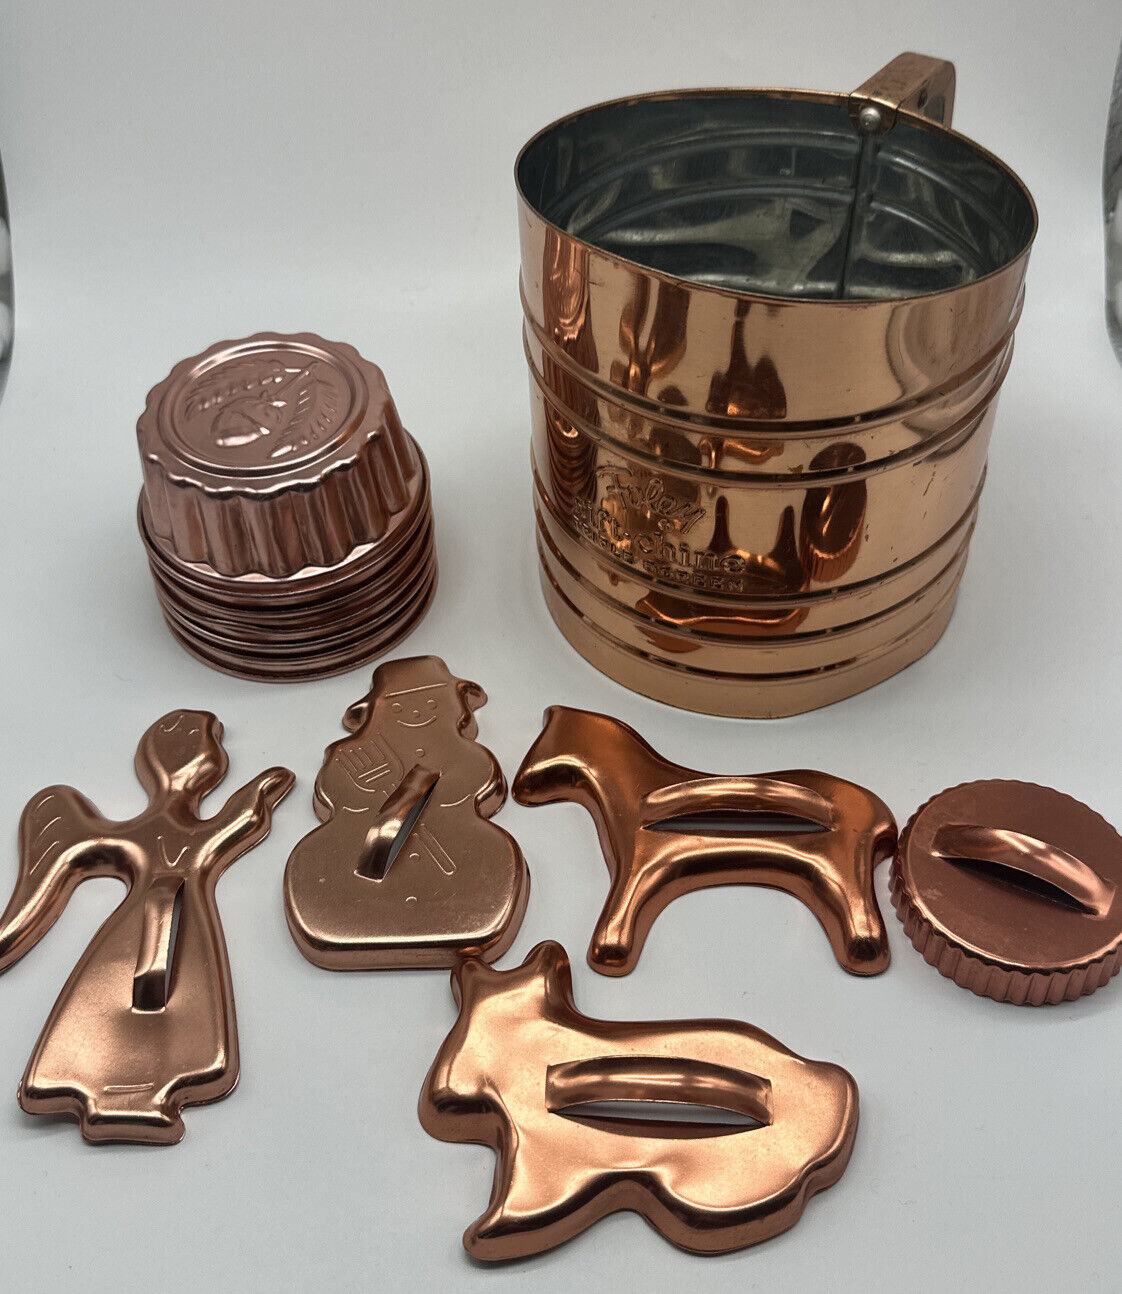 Vintage Copper Kitchen Gift Set-Foley Sifter, 6 Mini Tart Pans, 5 Cookie Cutters